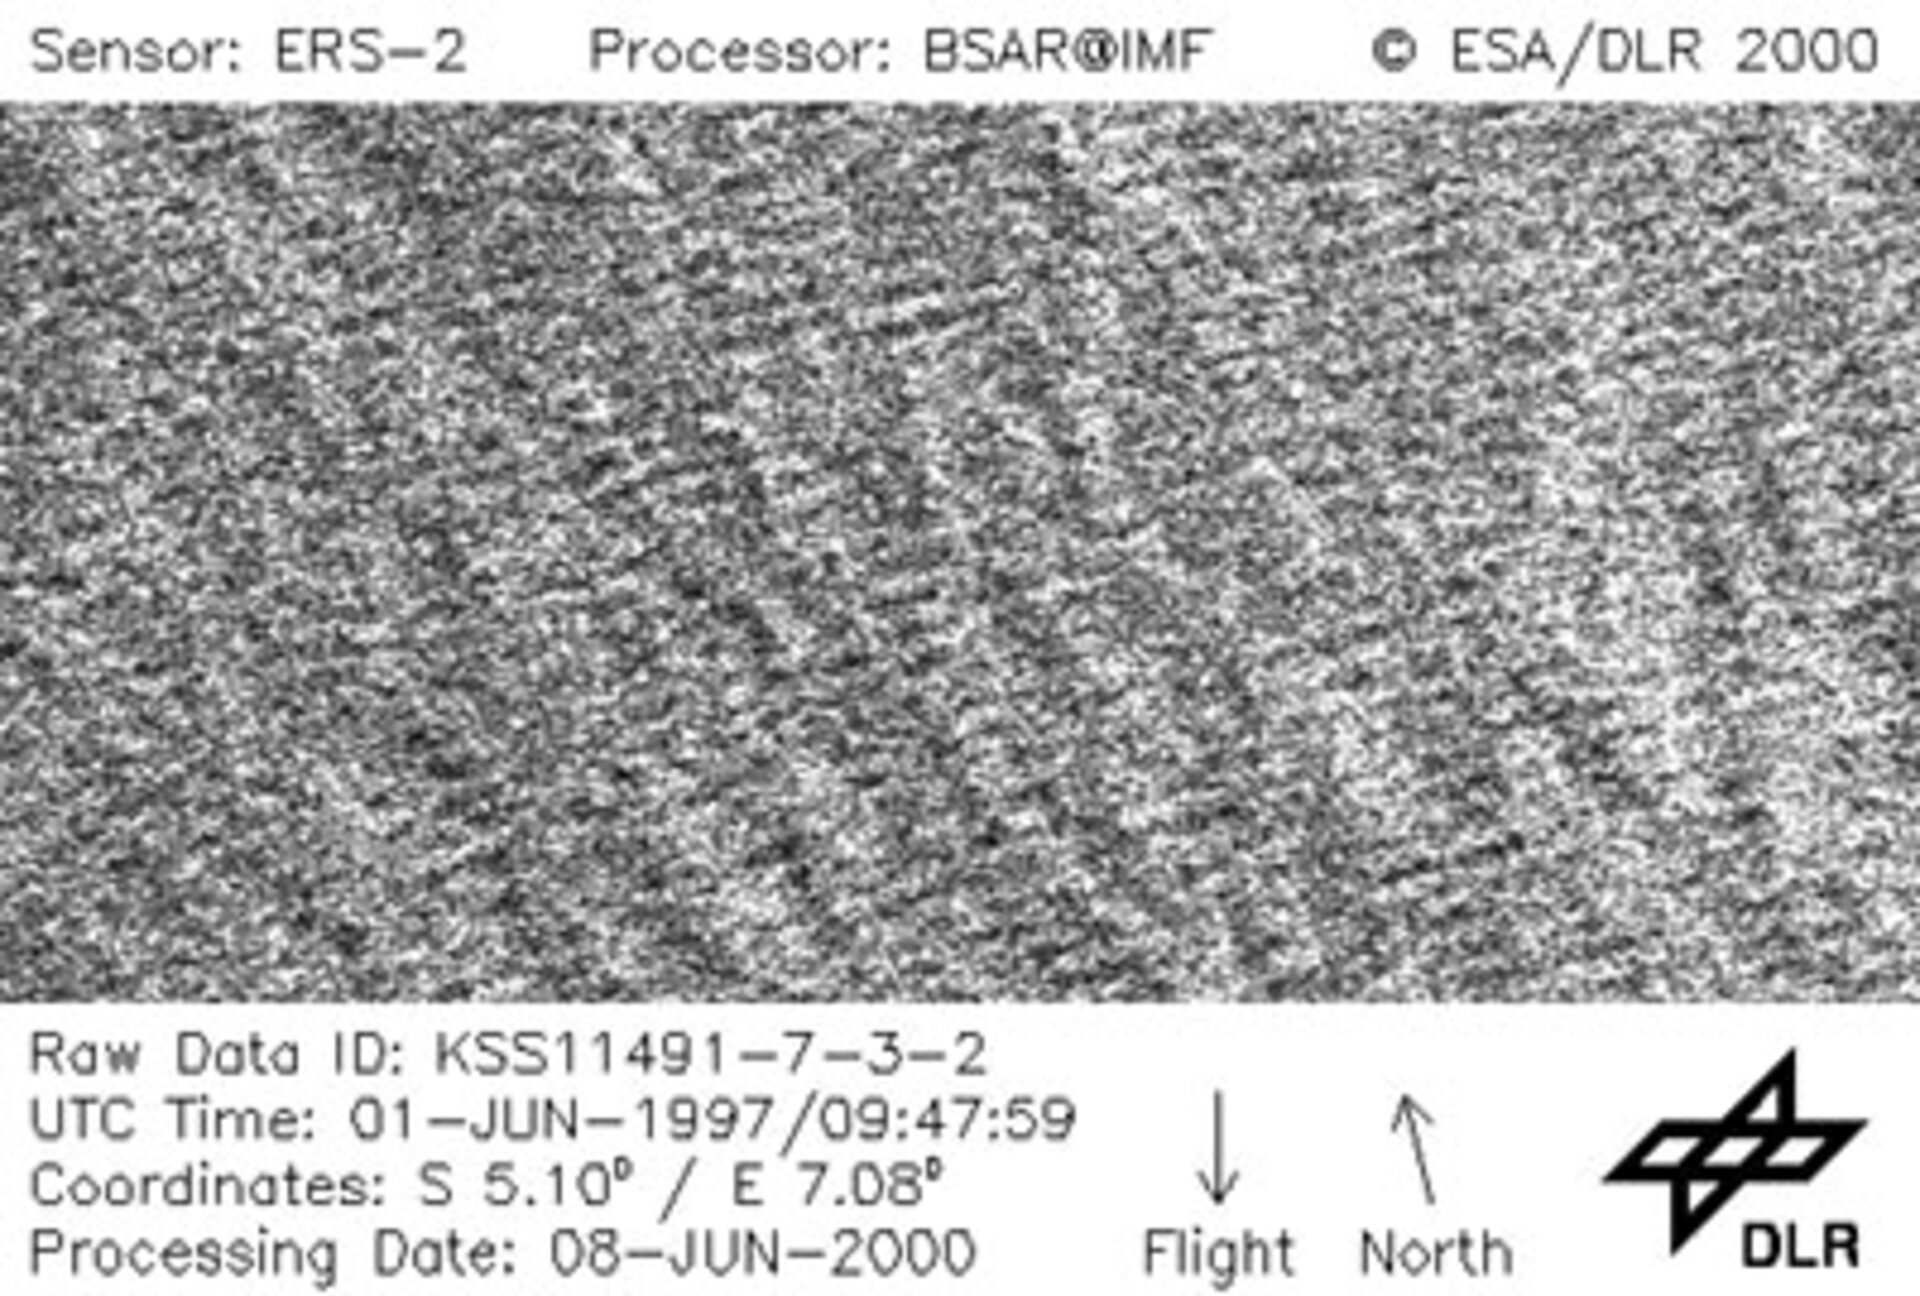 Example of an imagette from ERS-2